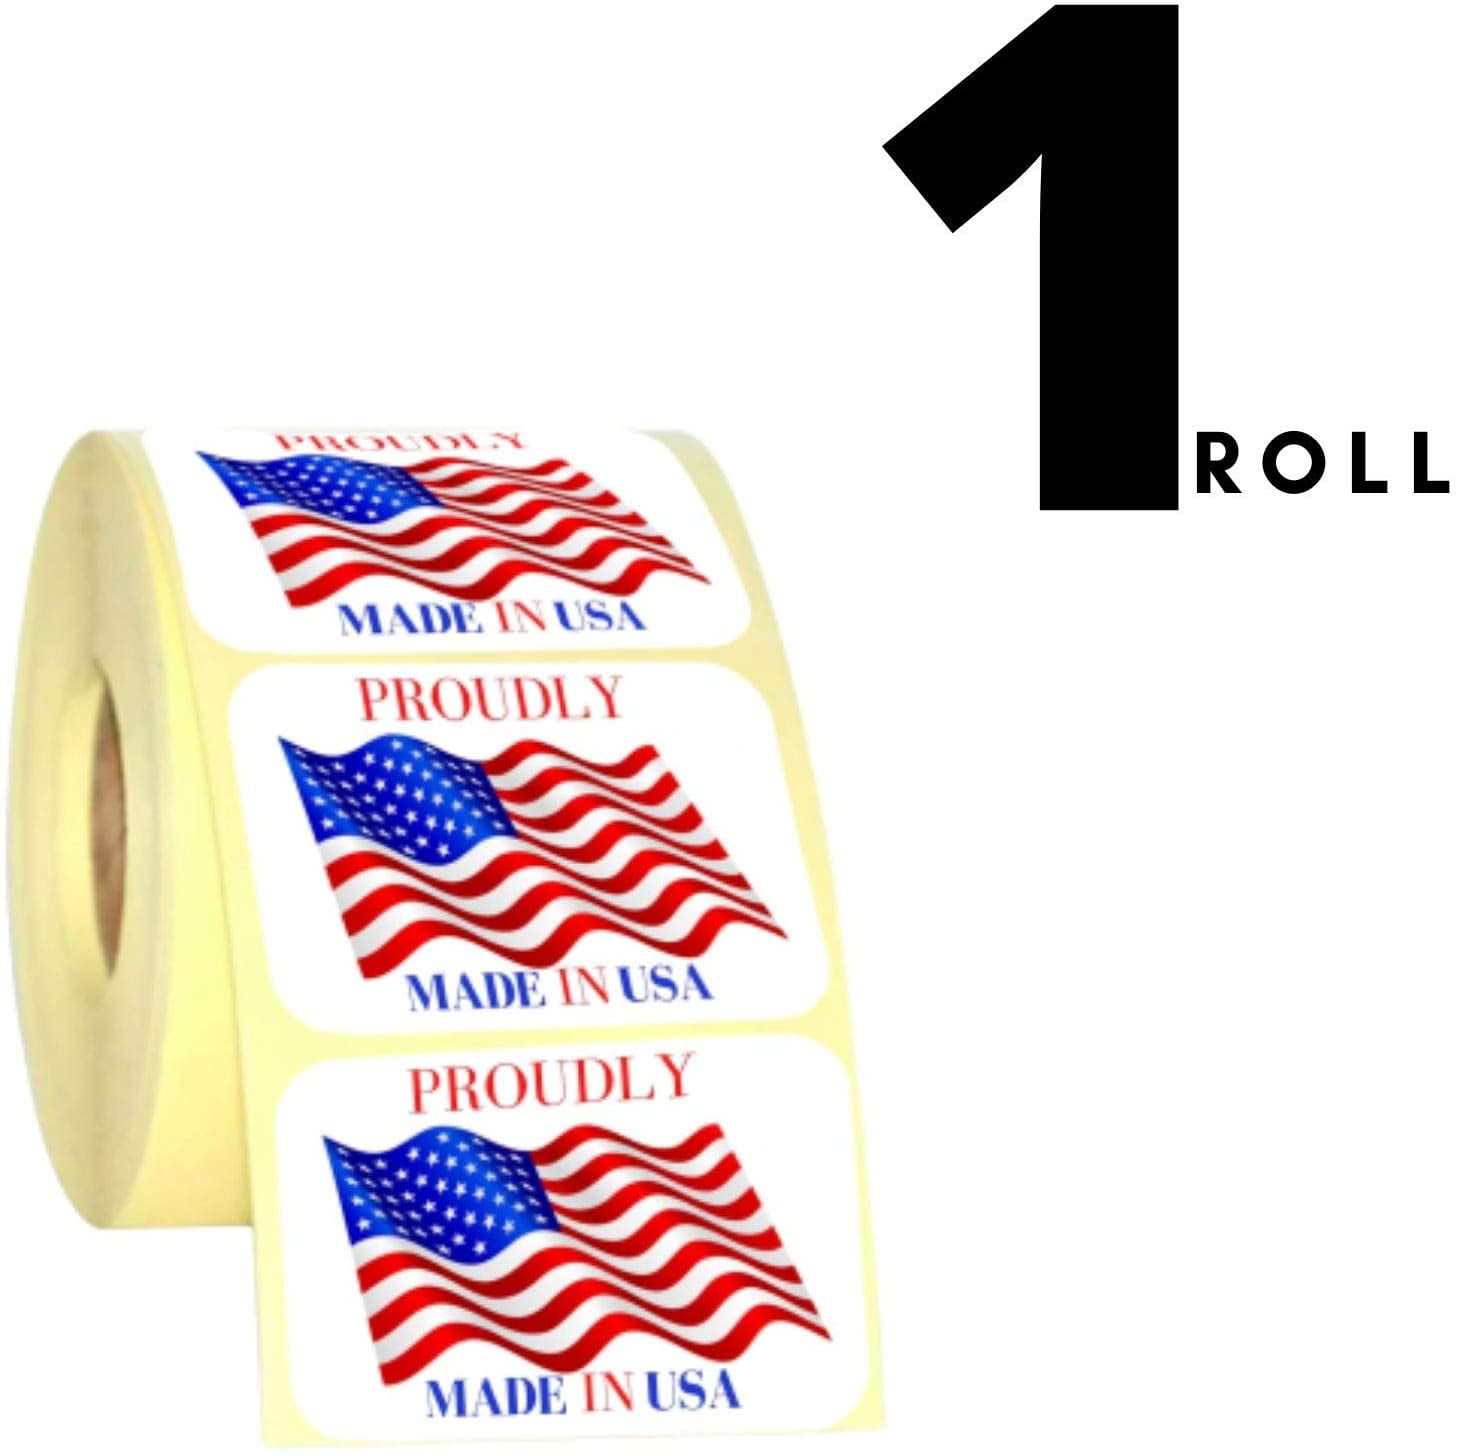 Details about   MADE IN USA Flag Pre-Printed Labels / Stickers 6 2" x 3" - Rolls of 500 